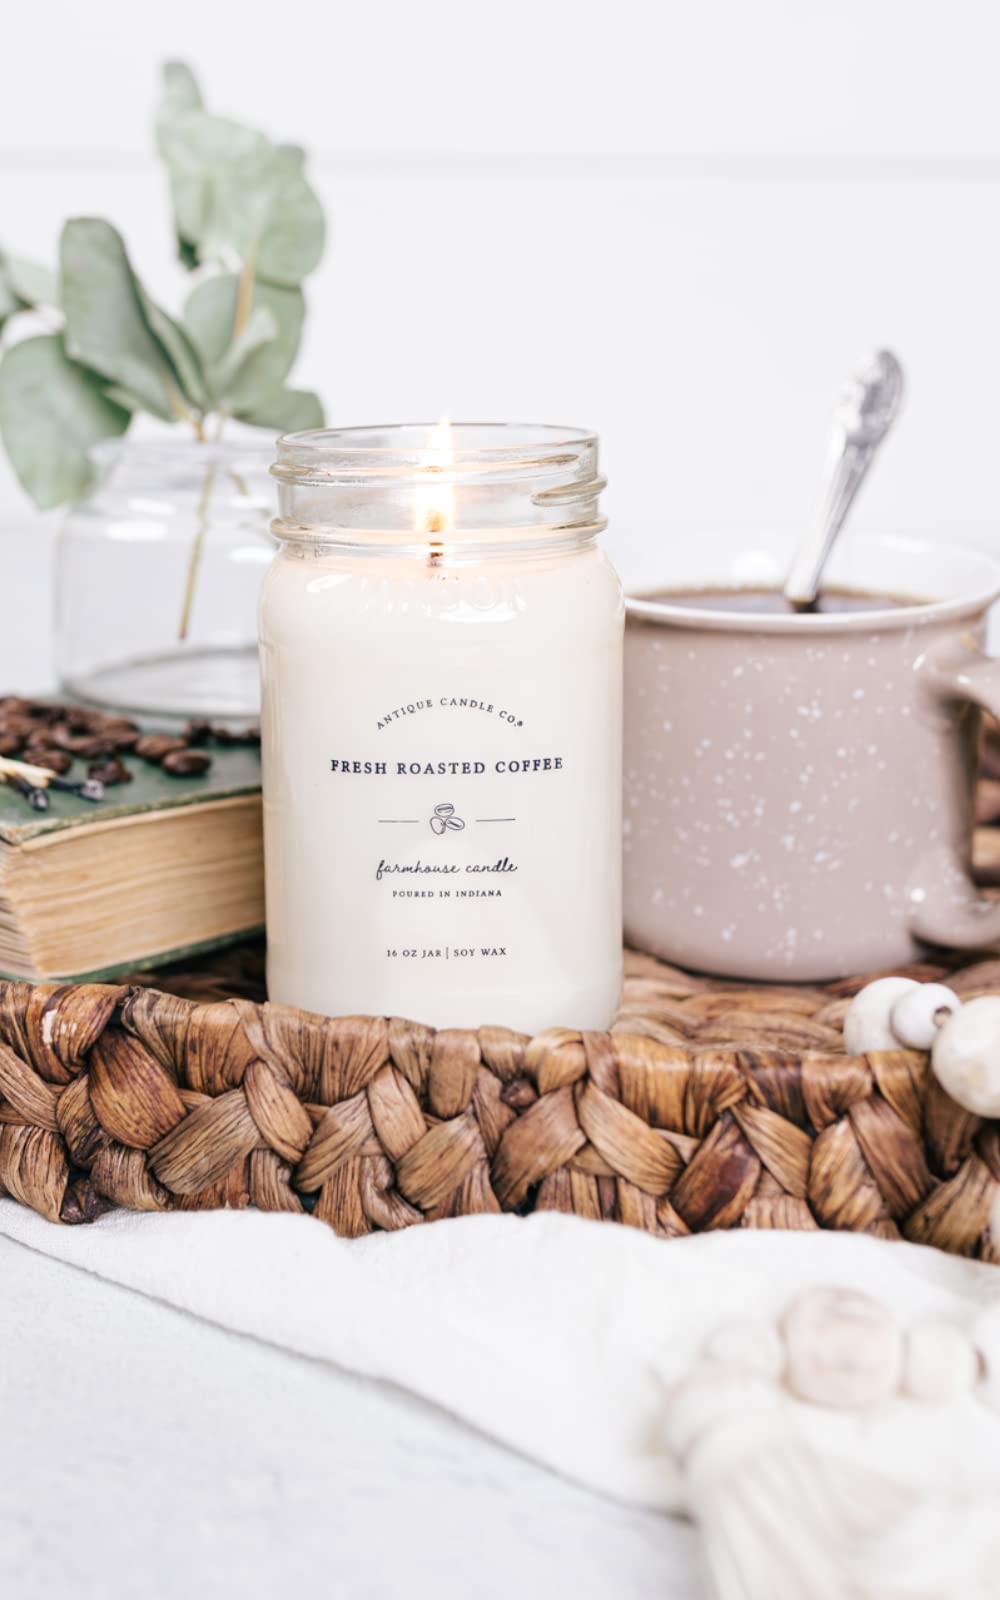 Antique Candle Co. - Assorted Candles